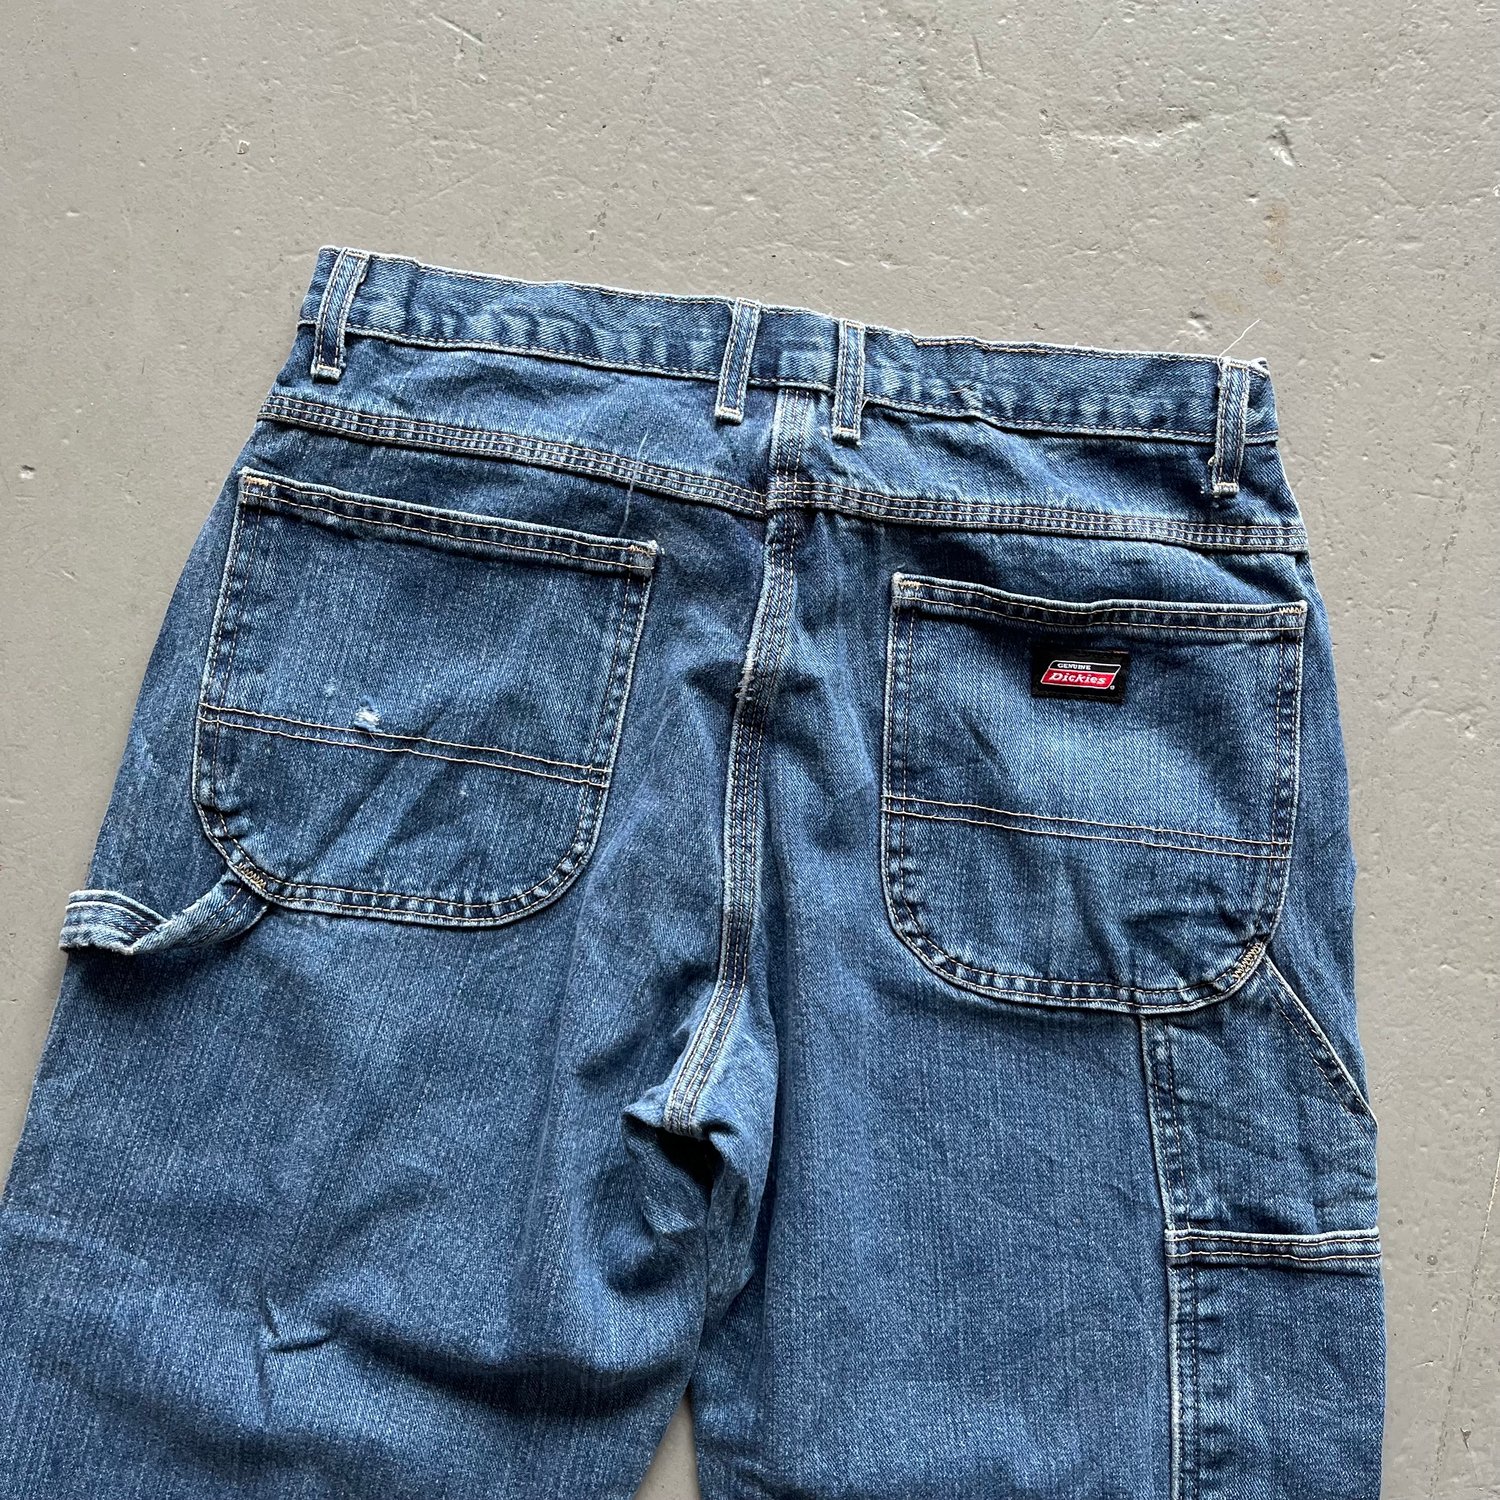 Image of Vintage Dickies carpenter jeans size 34/32